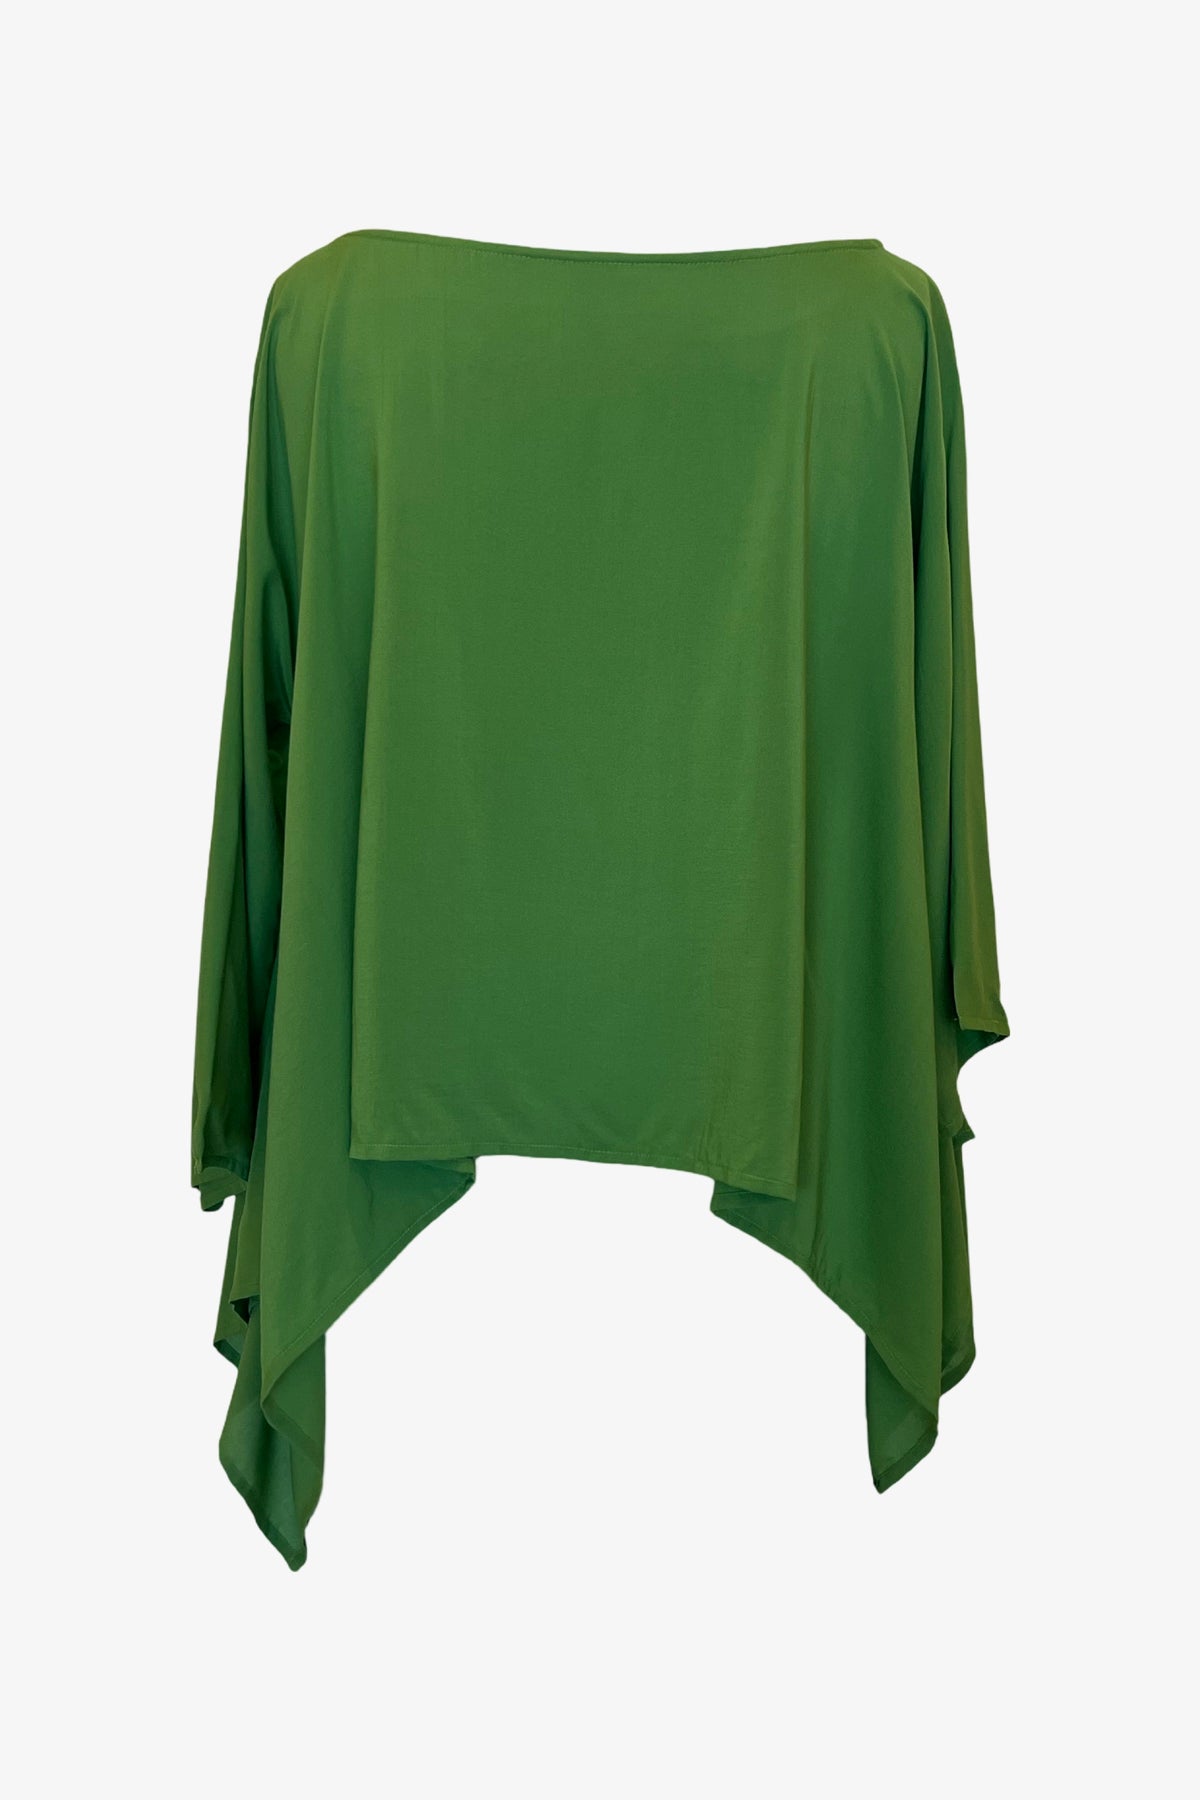 Square Top | Green Apple